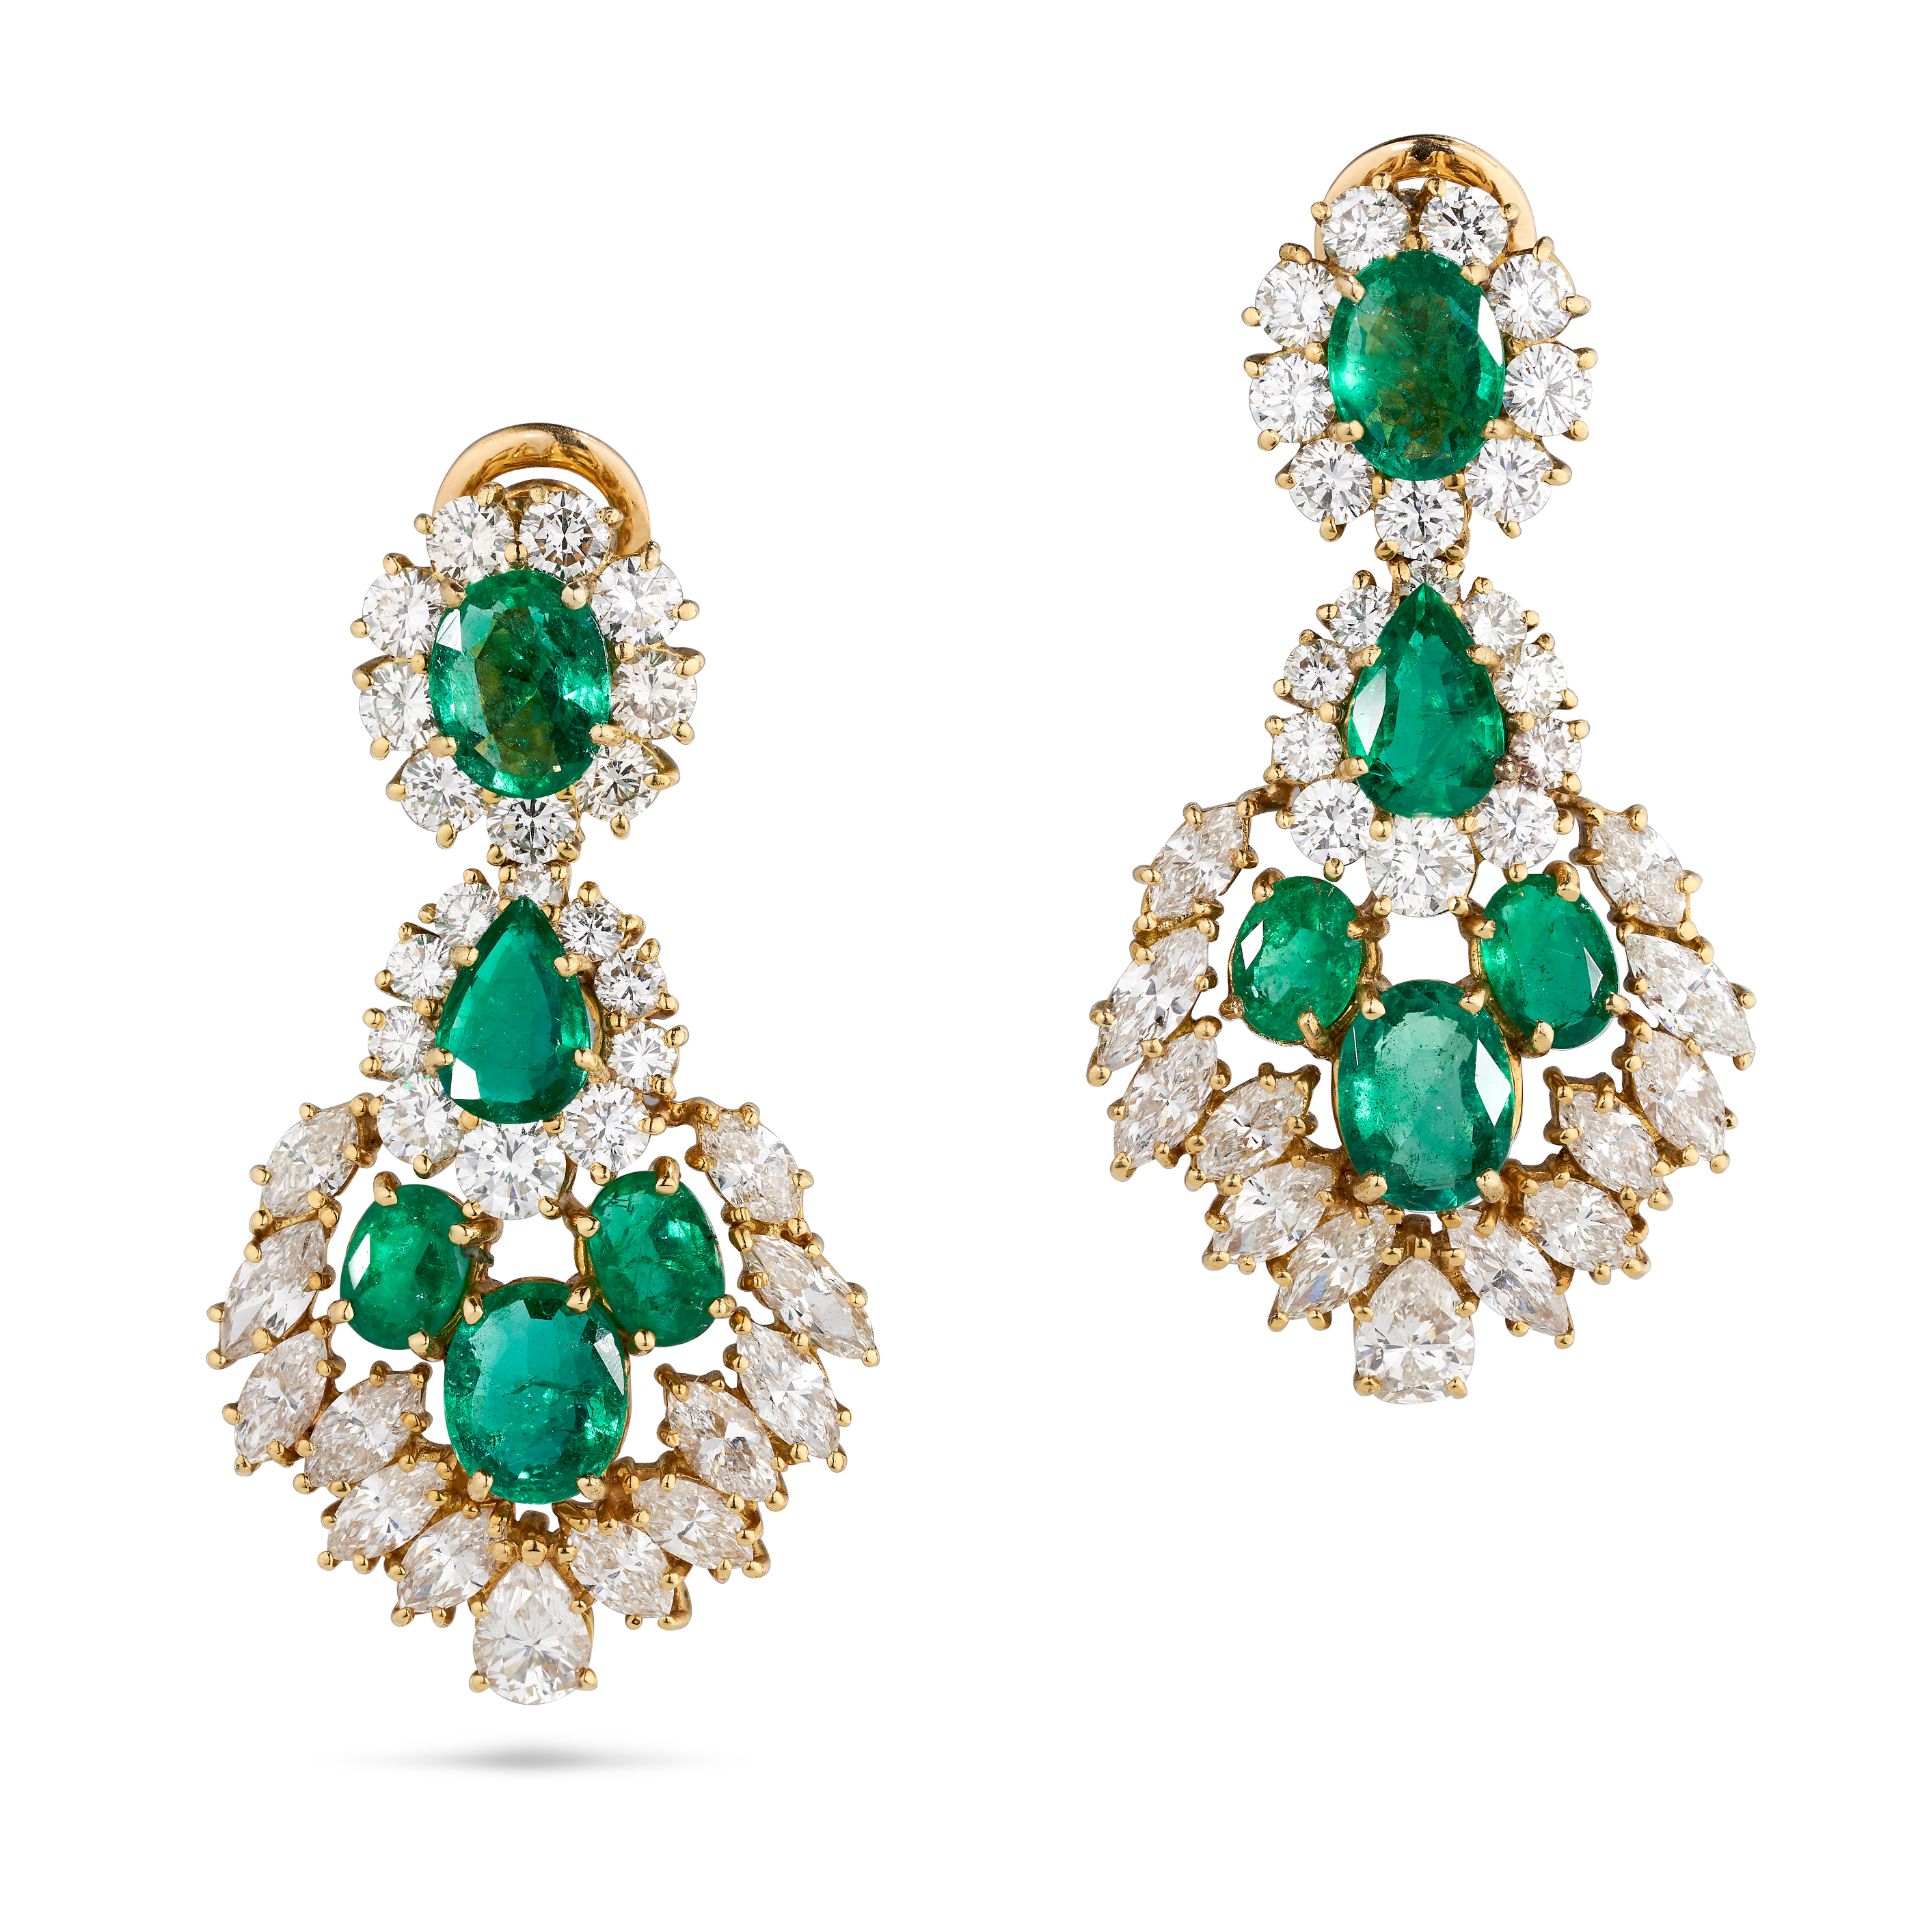 A PAIR OF EMERALD AND DIAMOND DROP EARRINGS in 18ct yellow gold, set with an oval cut emerald in ... - Image 3 of 4